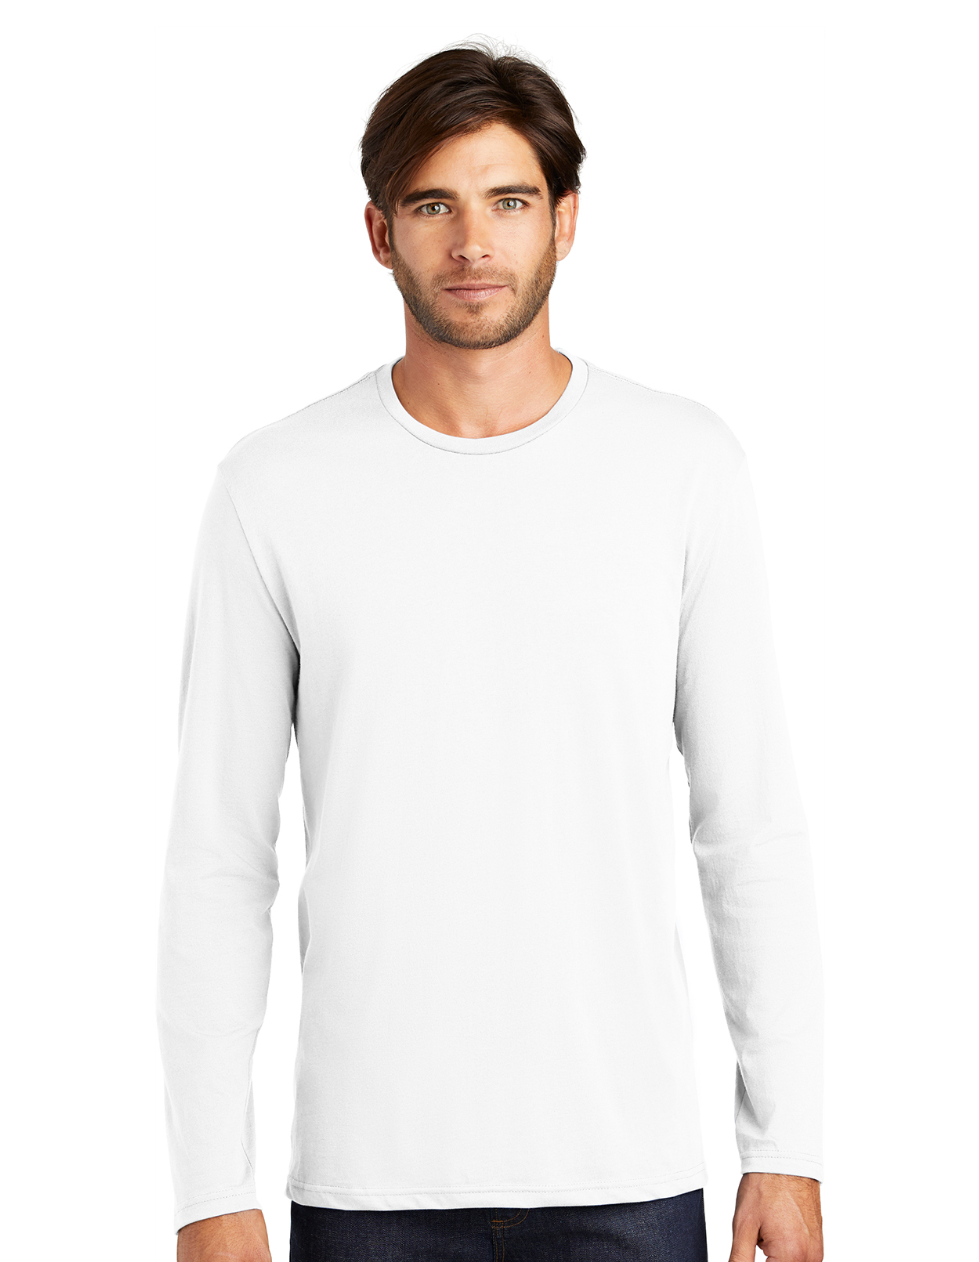 ZOI - Men's Perfect Weight Long Sleeve